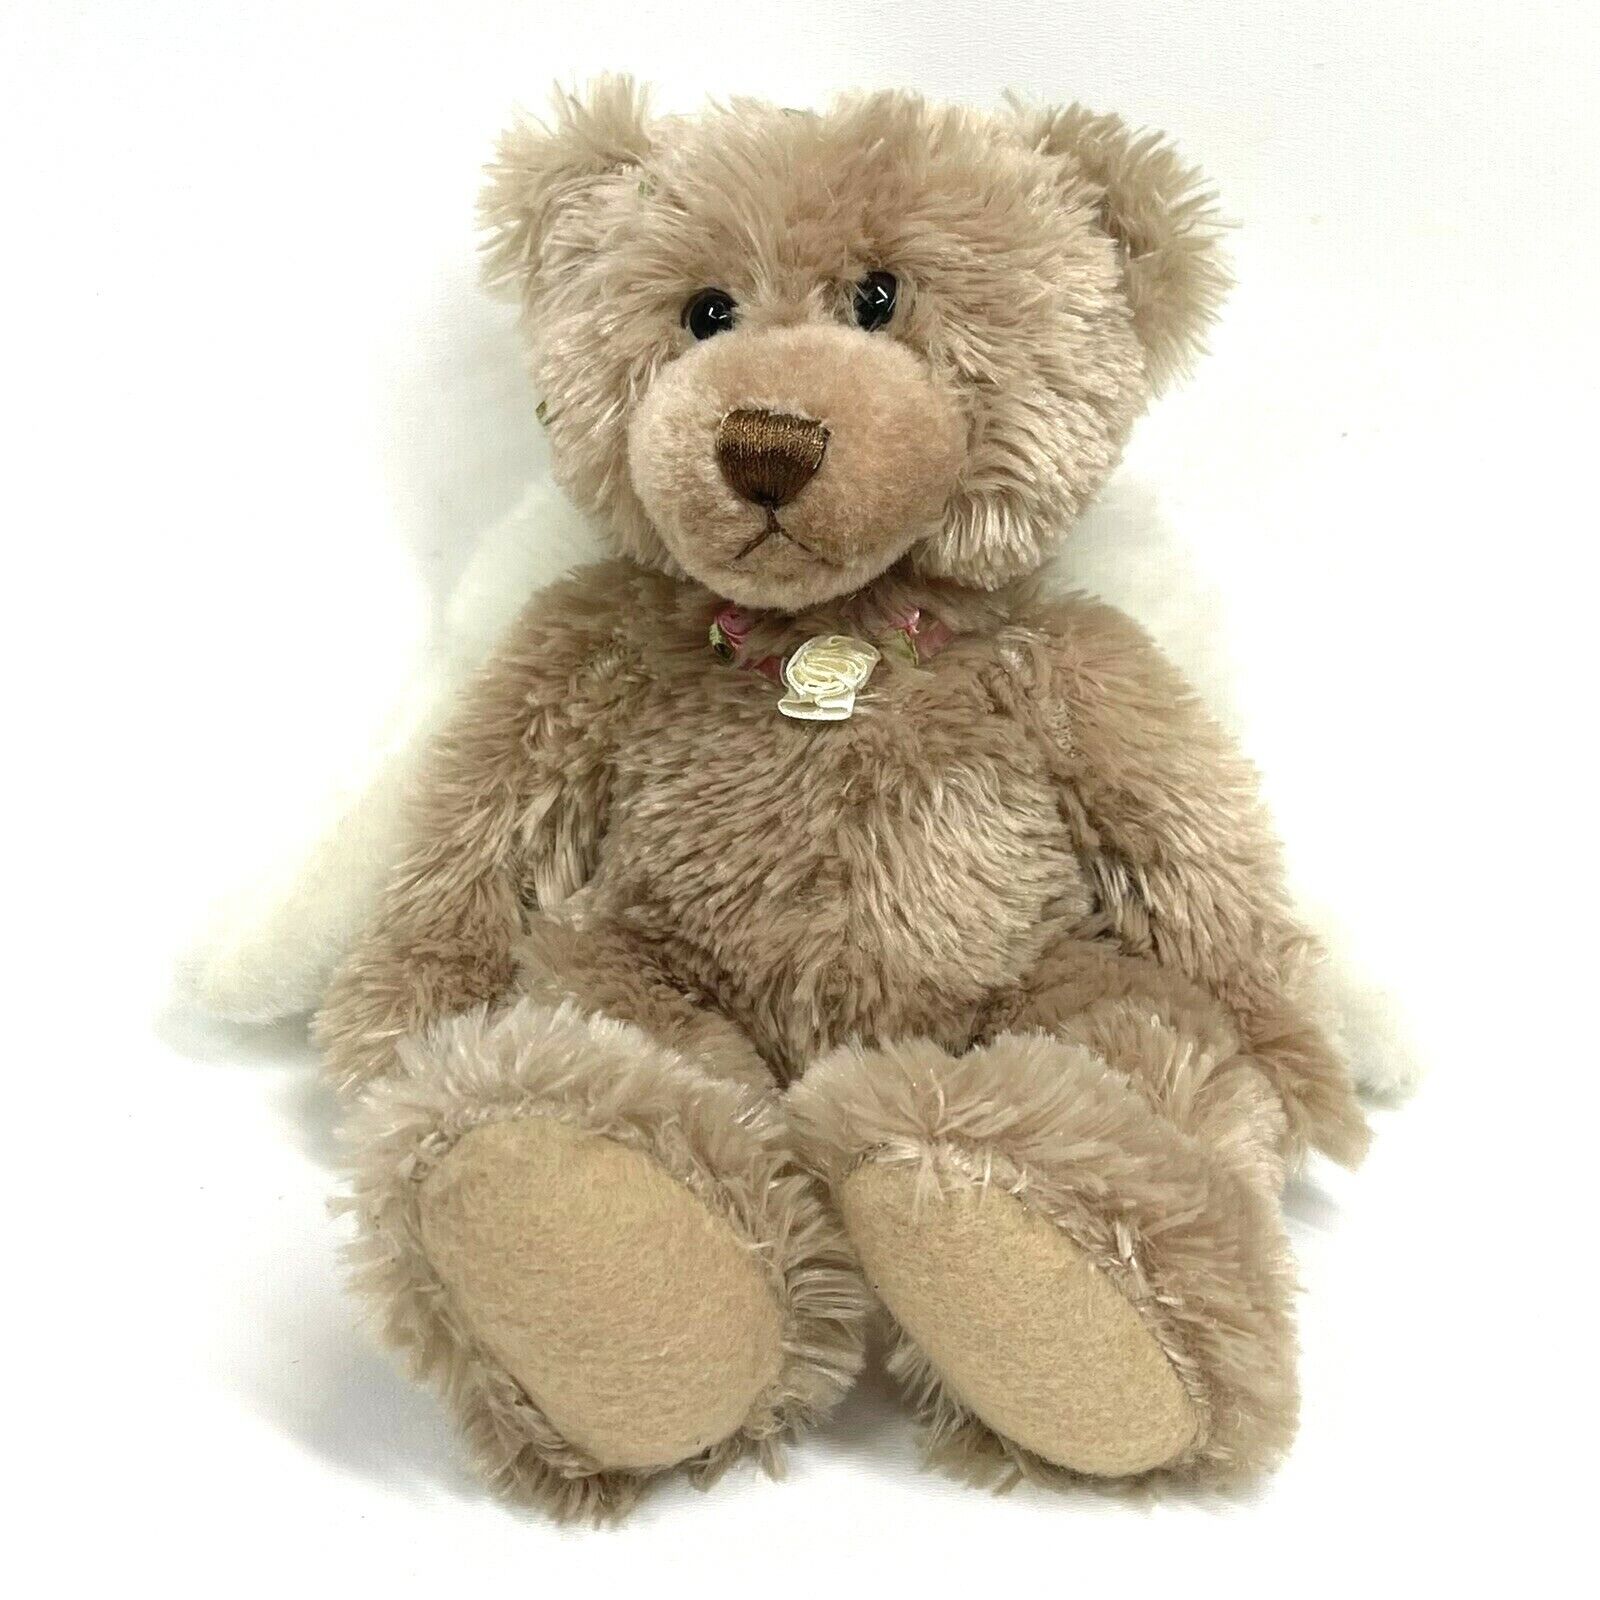 First & Main Plush Tan Fuzzy Angel Bears Teddy Roses White Wings Teddy 12” Tall